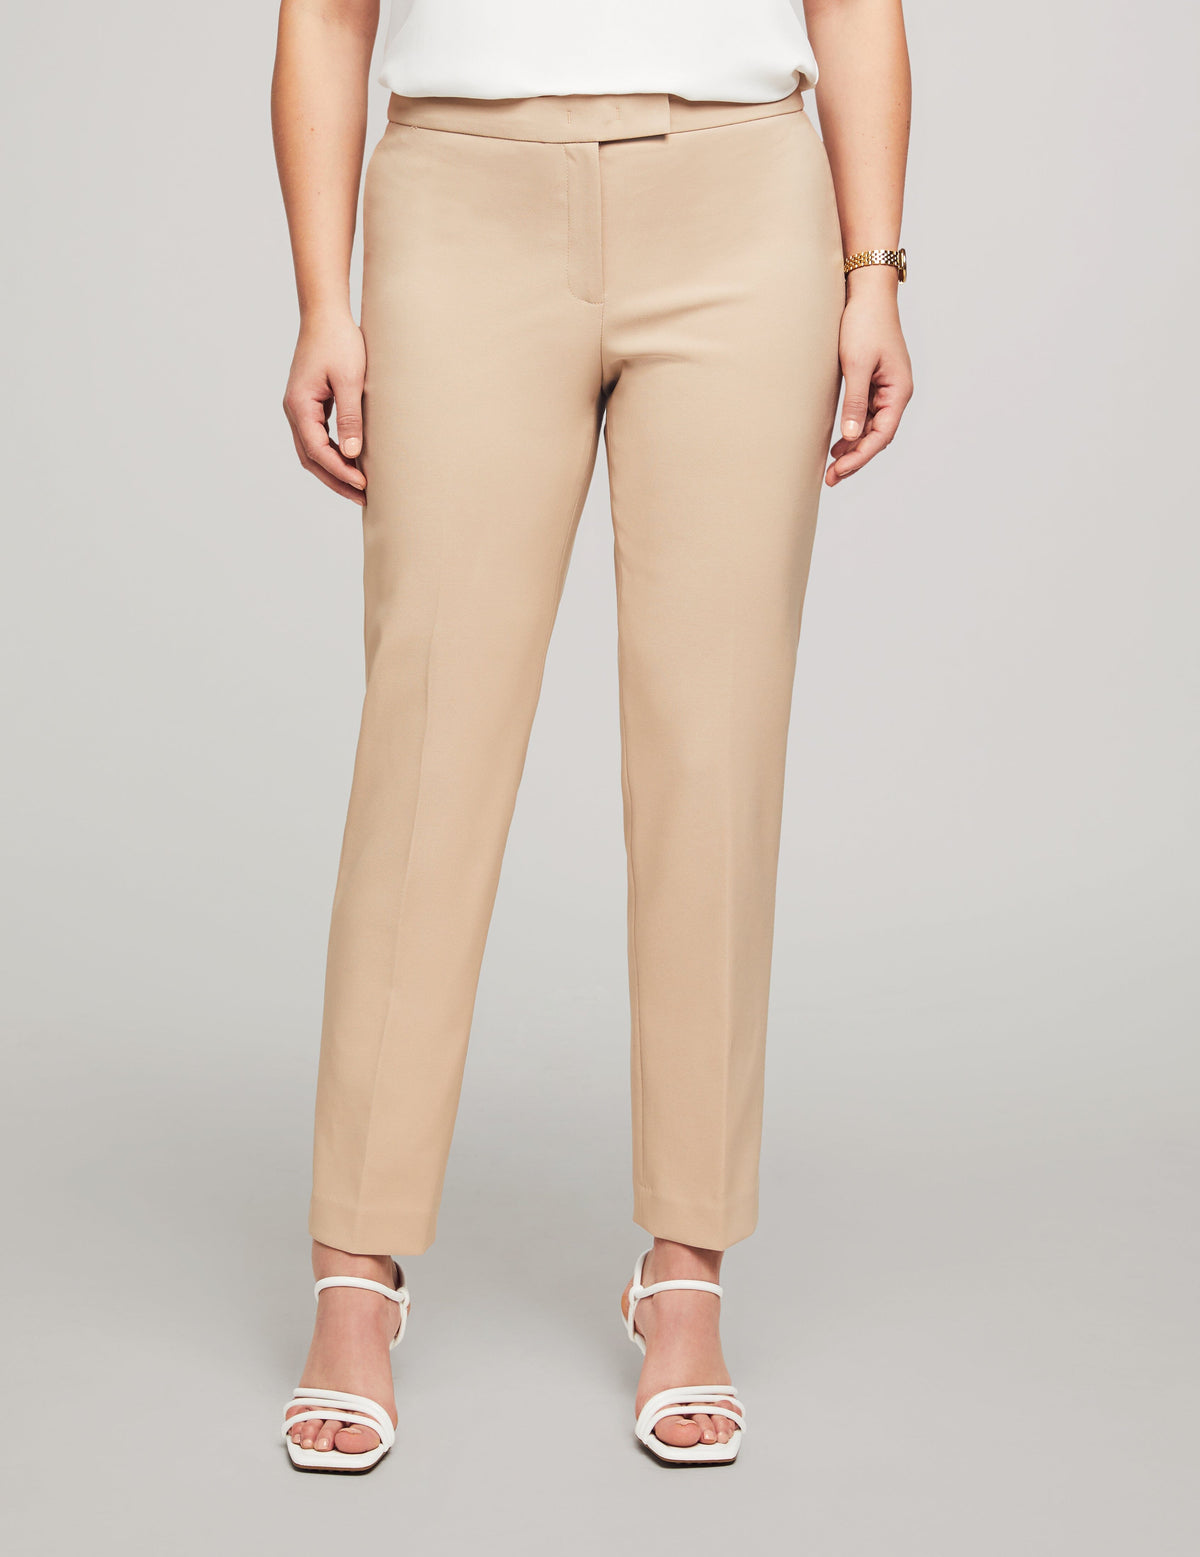 Anne Klein Light Coffee Fly Front Extend Tab Pant Bowie Pant- Clearance